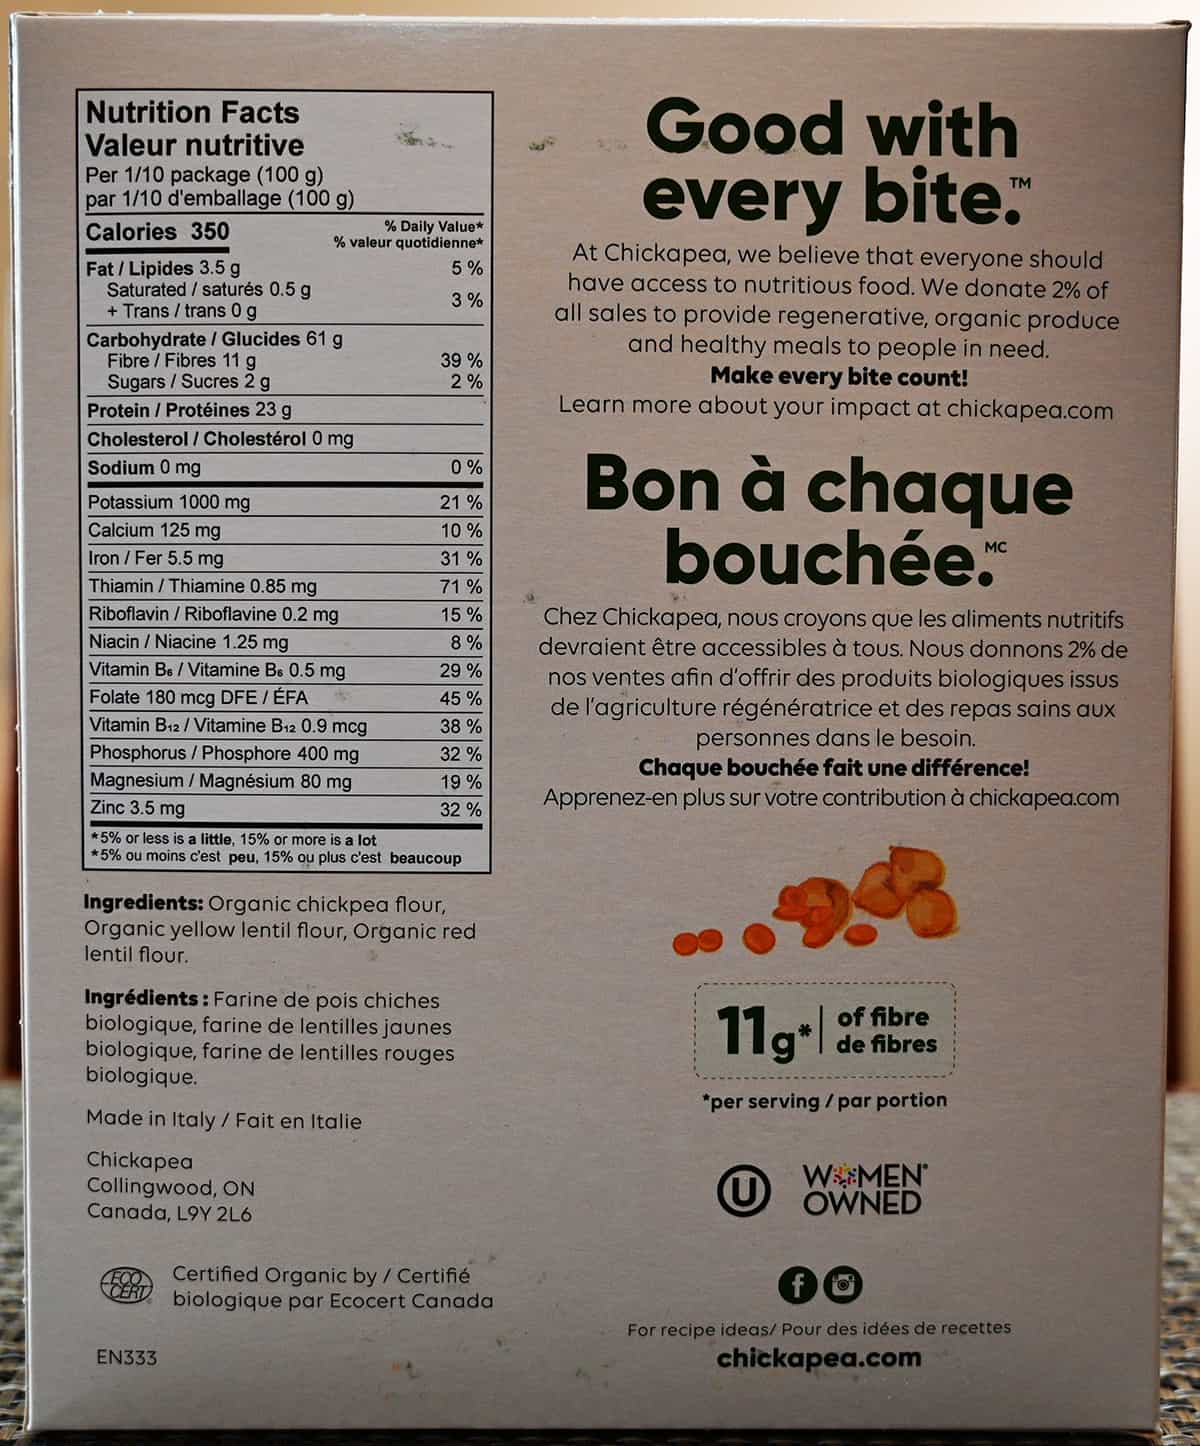 Image of the back of the box of pasta showing ingredients, nutrition facts and product description.